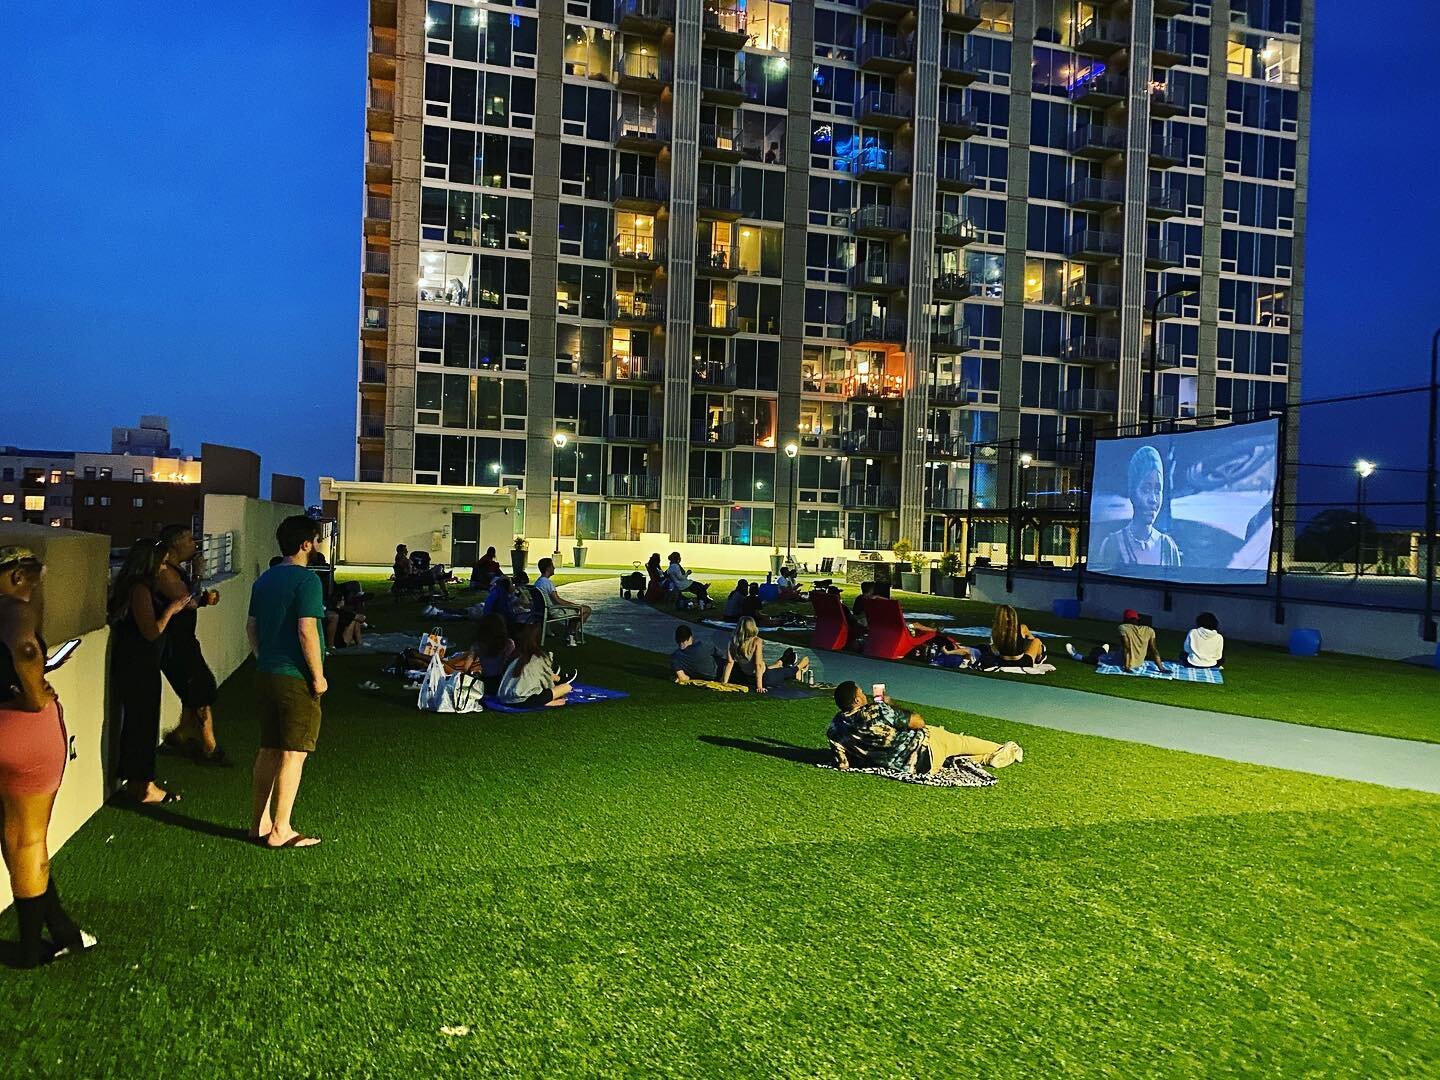 If you need a movie we can help!
. 
.
.
.
#movie #movienight #outdoormovie #projector #subwoofers #moviescreen @cltapartments #residentactivities #residentevents @skyhouseuptown